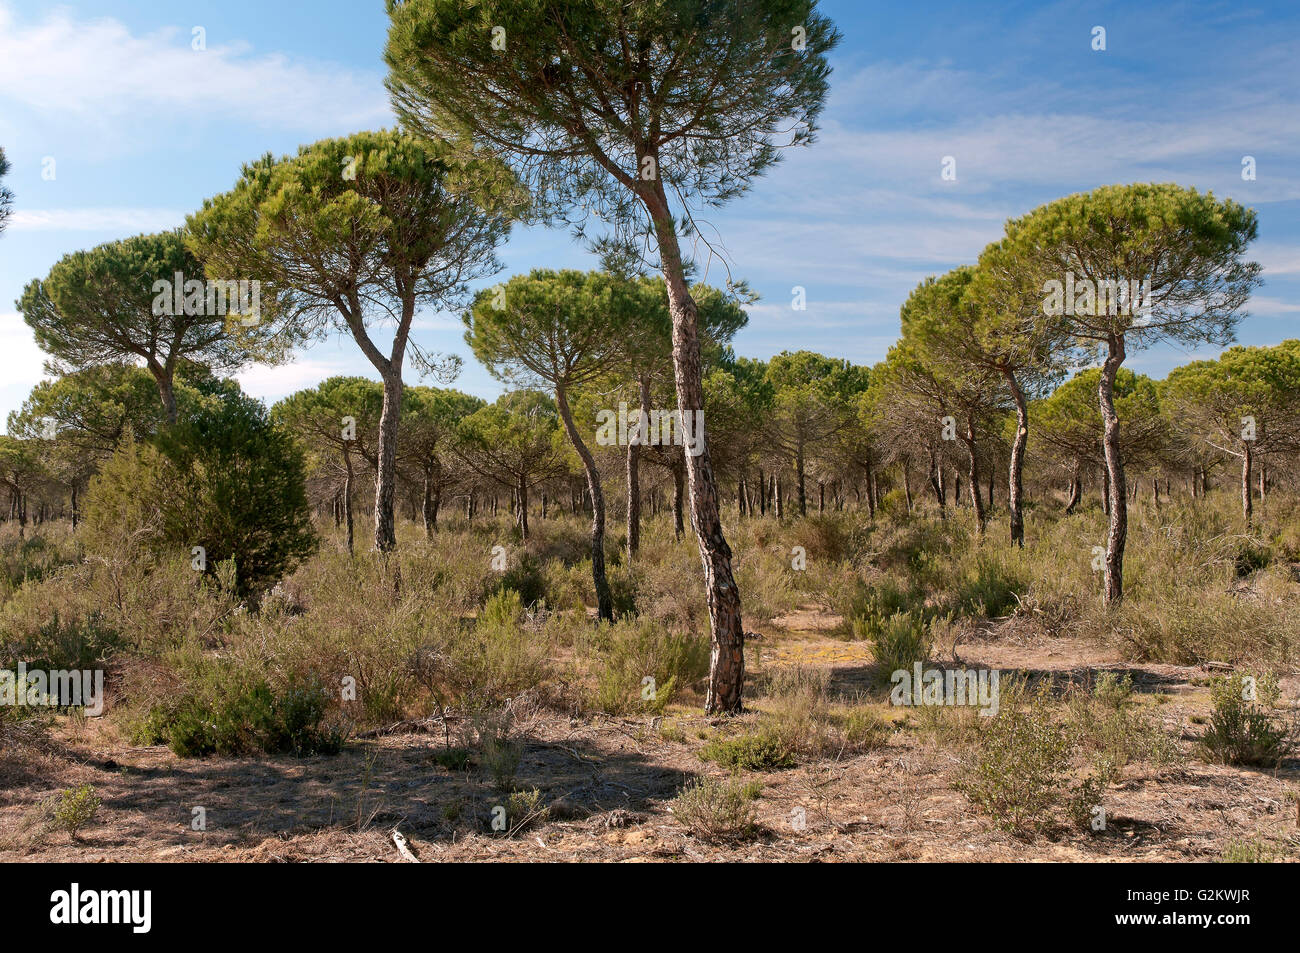 Pine forest in Donana National Park, Huelva, Region of Andalusia, Spain, Europe Stock Photo